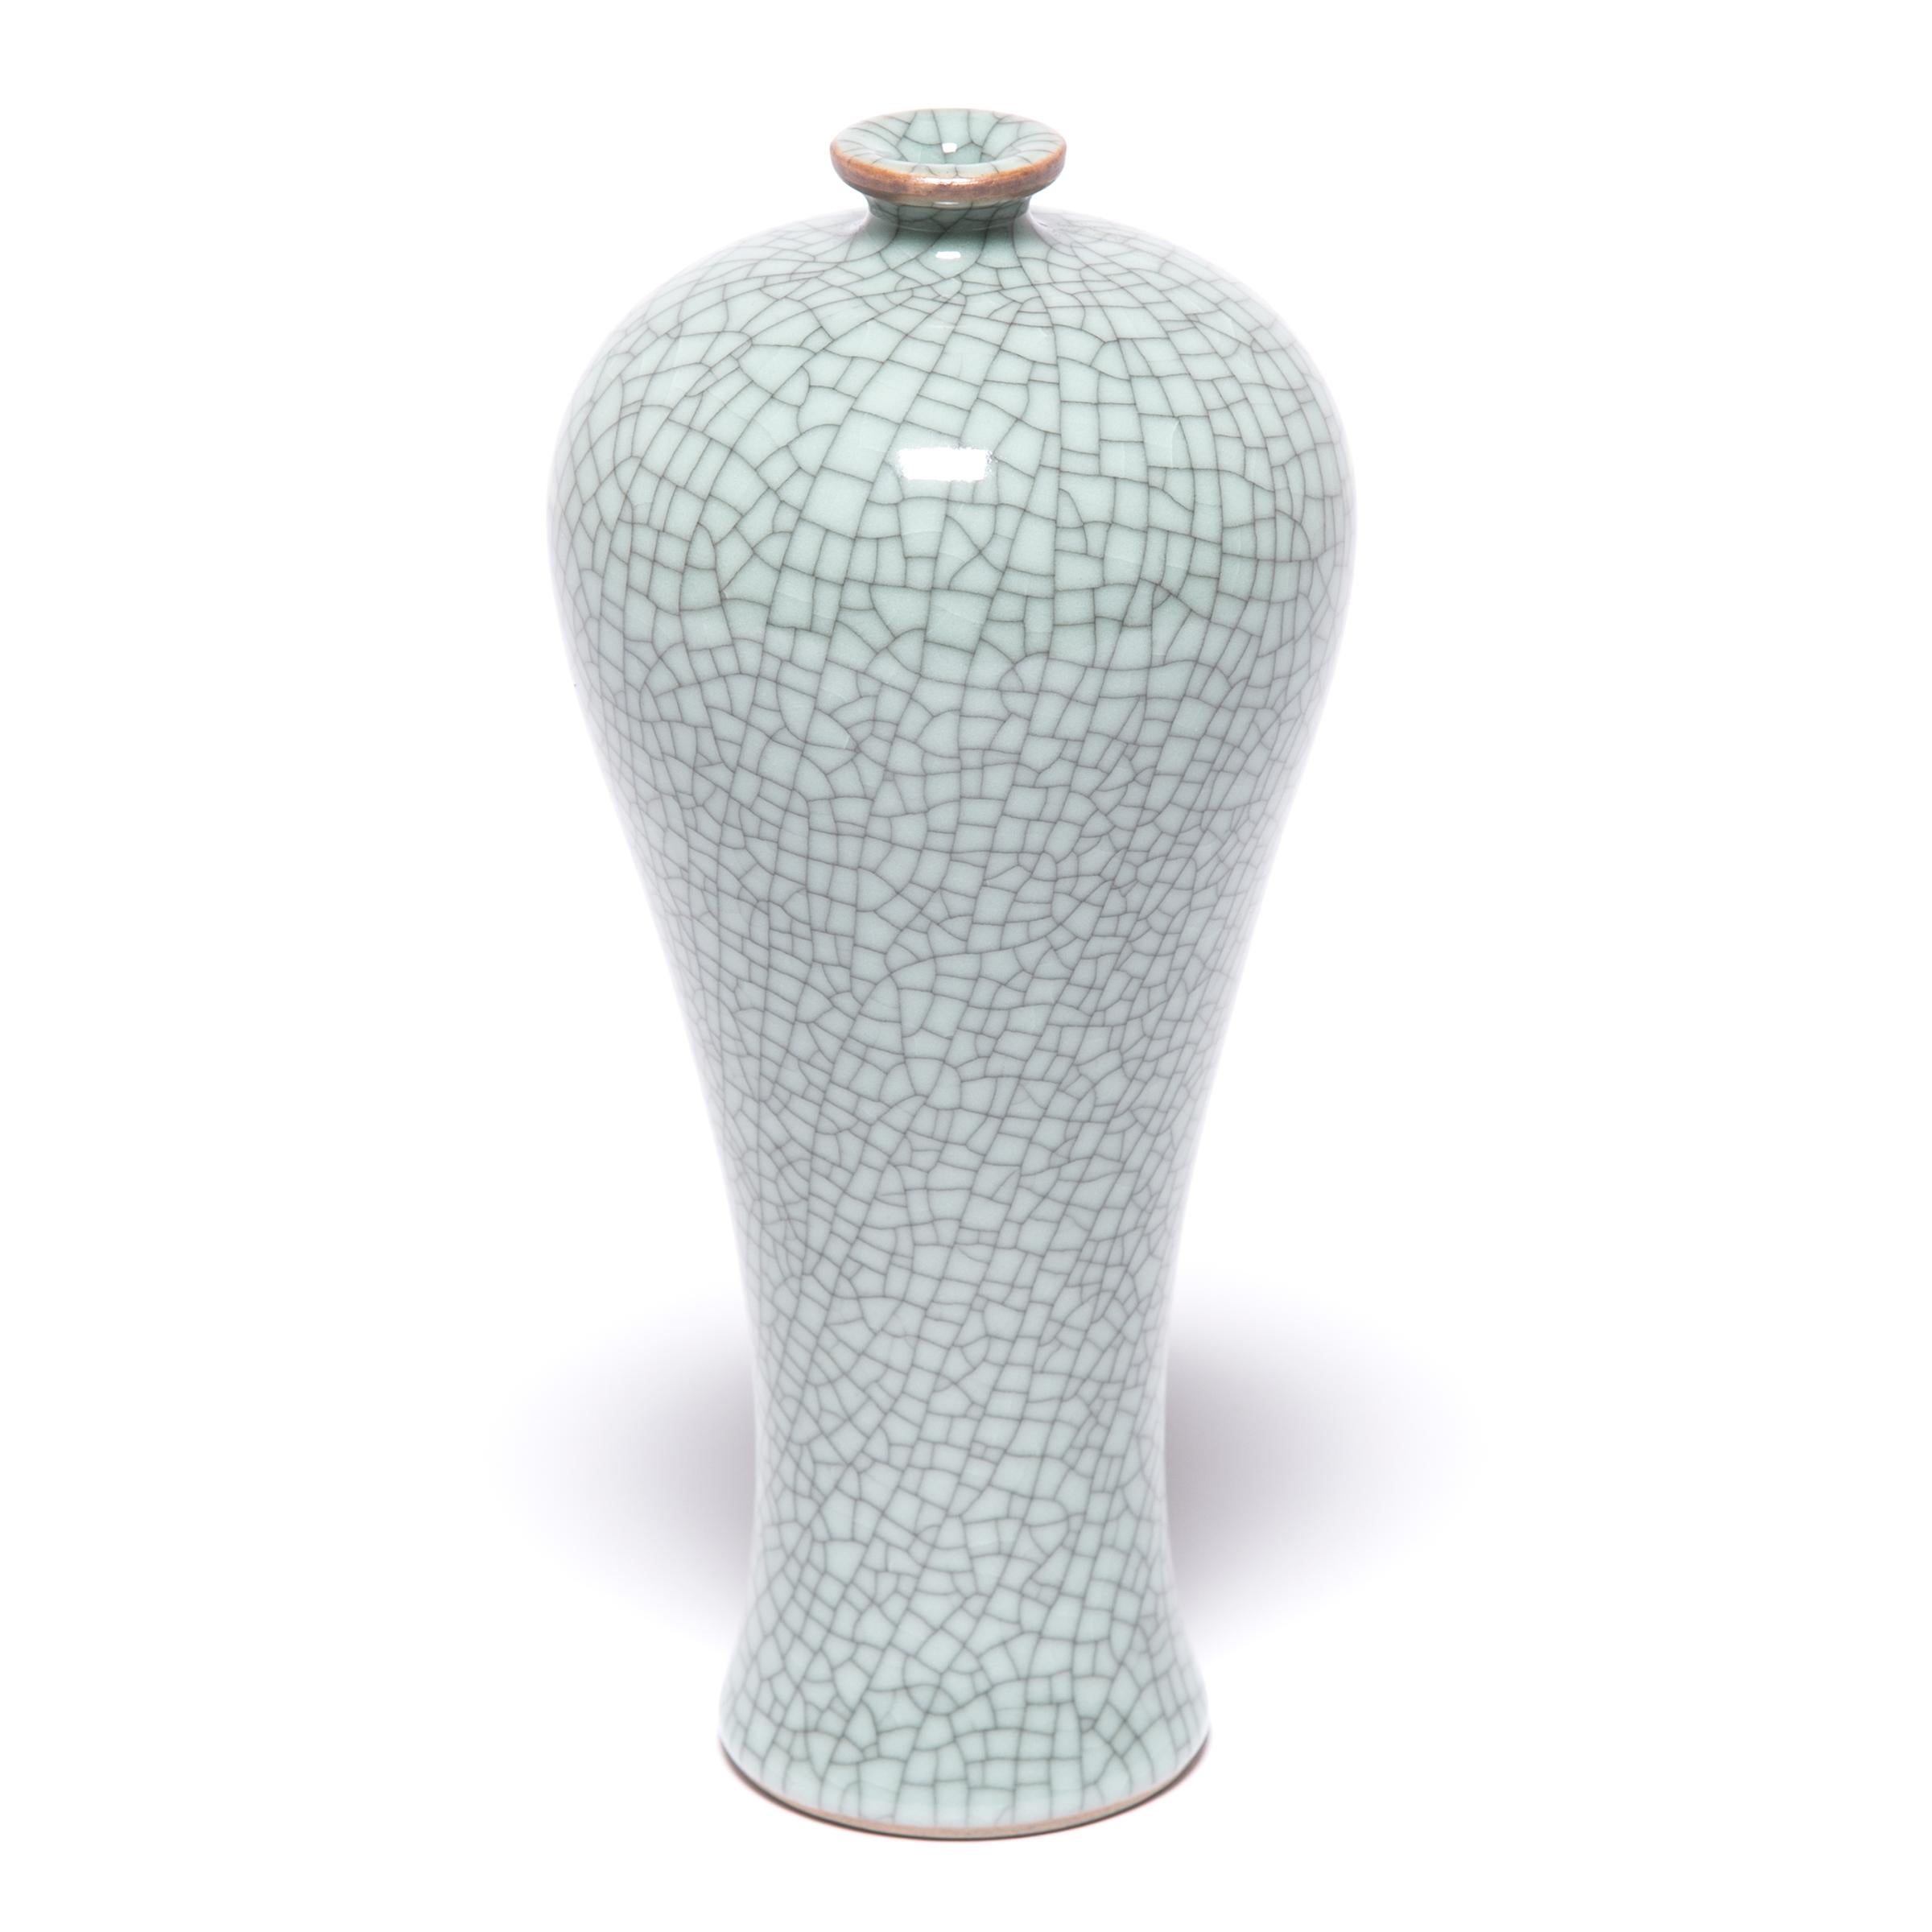 This contemporary vase hearkens back to Classic meiping form, traditionally used to display flowering plum branches. Master ceramic artists in Zhejiang beautifully recreate the distinctive crackle glaze of traditional Guan and Ge ware, allowing a